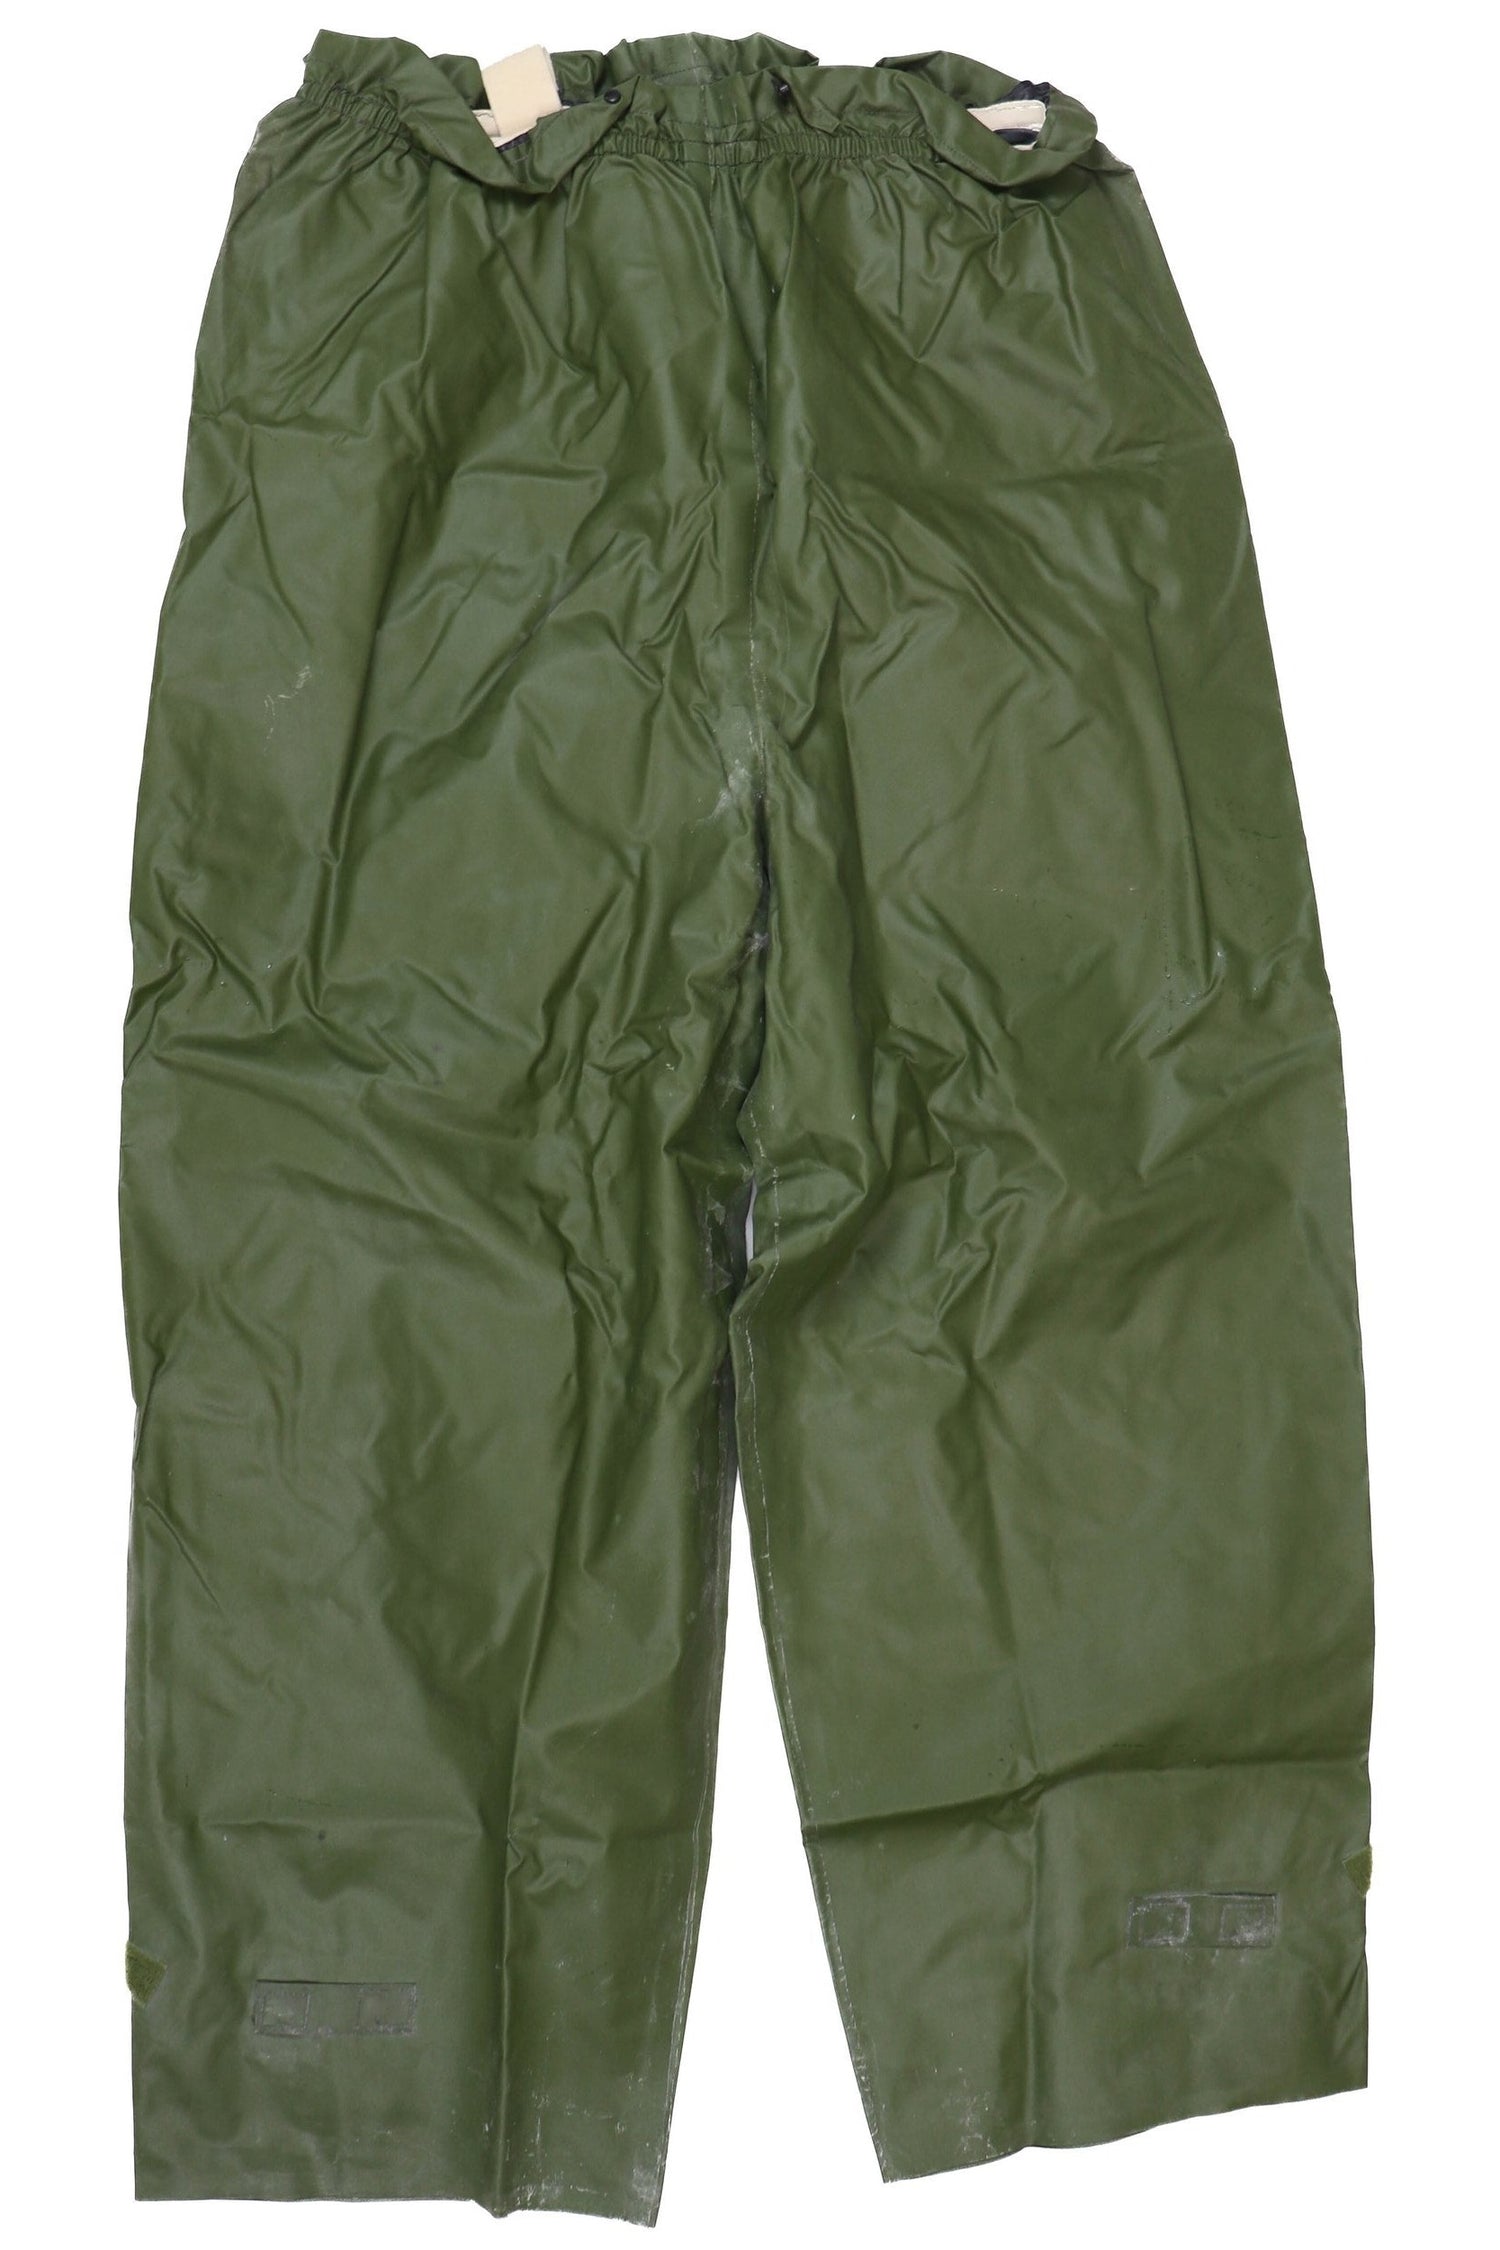 US Army OD Green Wet Weather Trousers